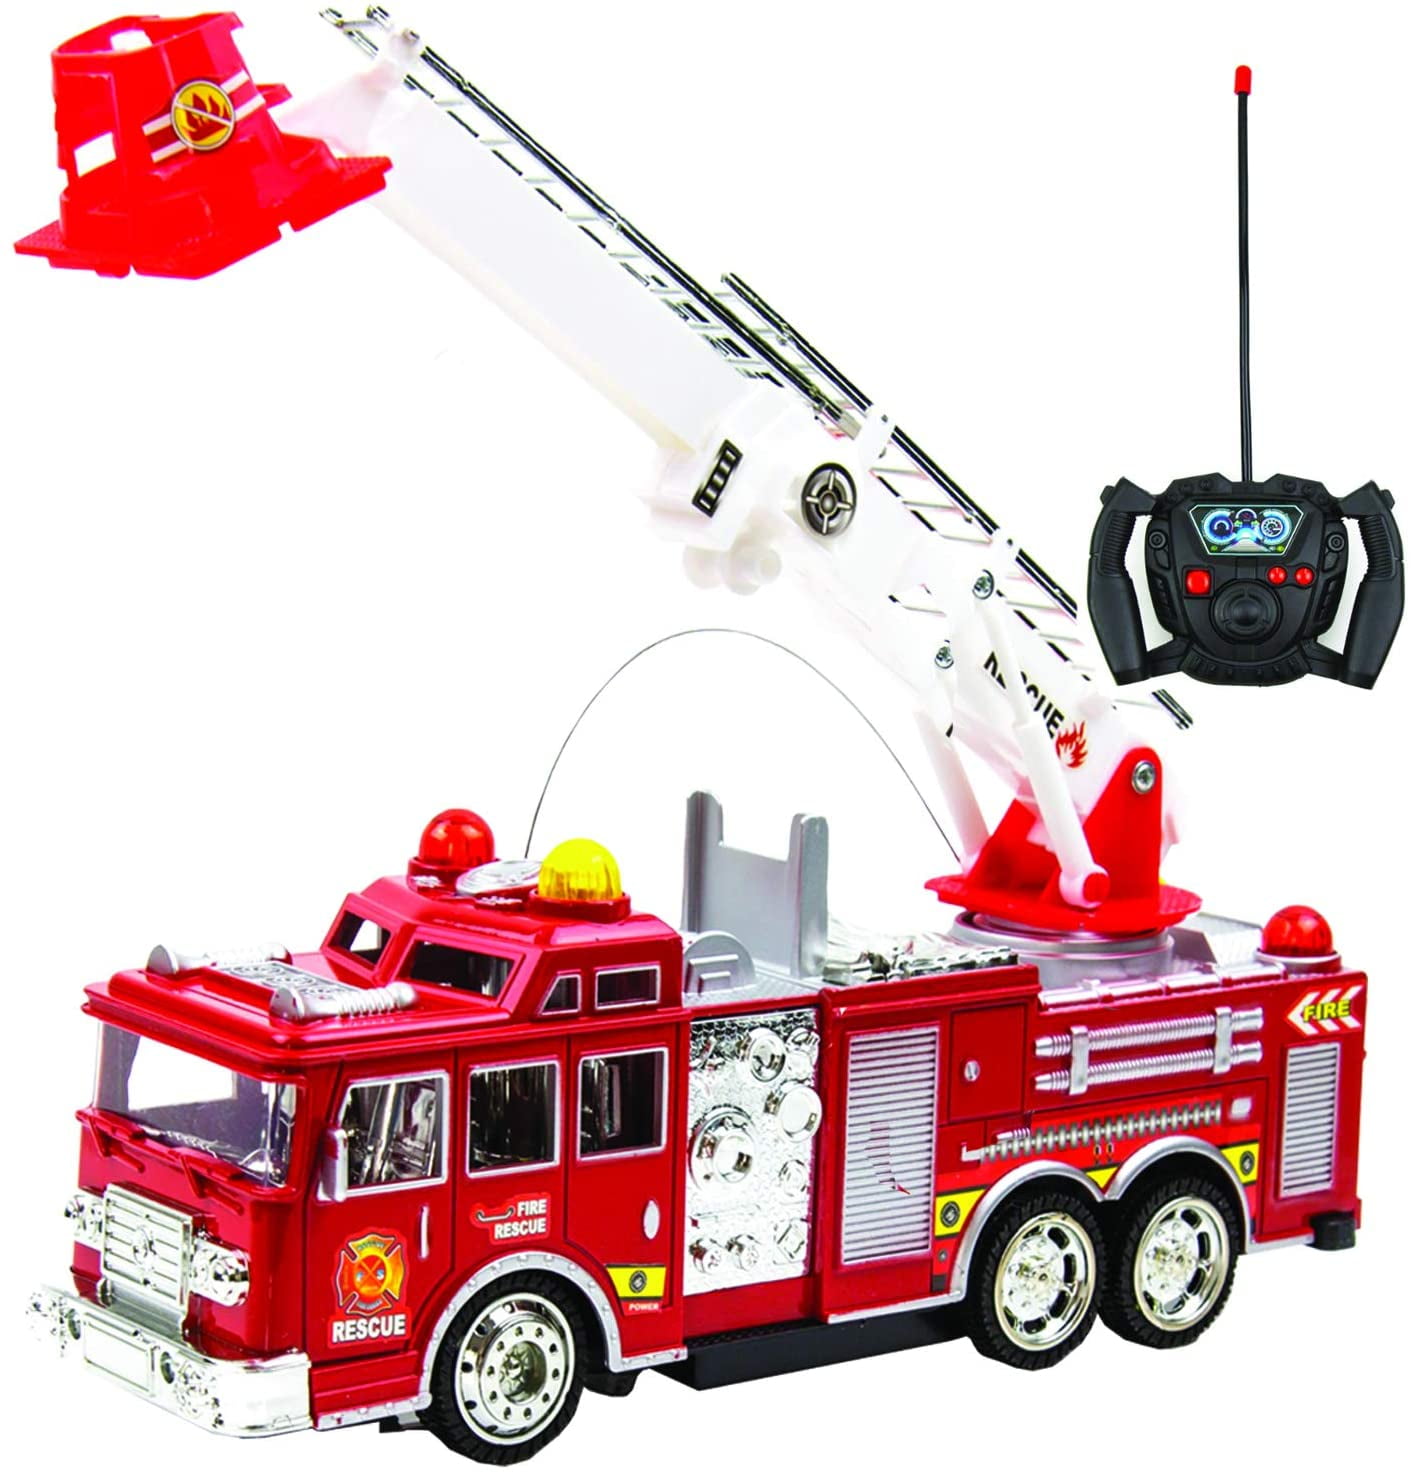 Prextex RC Fire Engine Truck Remote Control 13-Inch Rescue Fire Truck with 17-In 